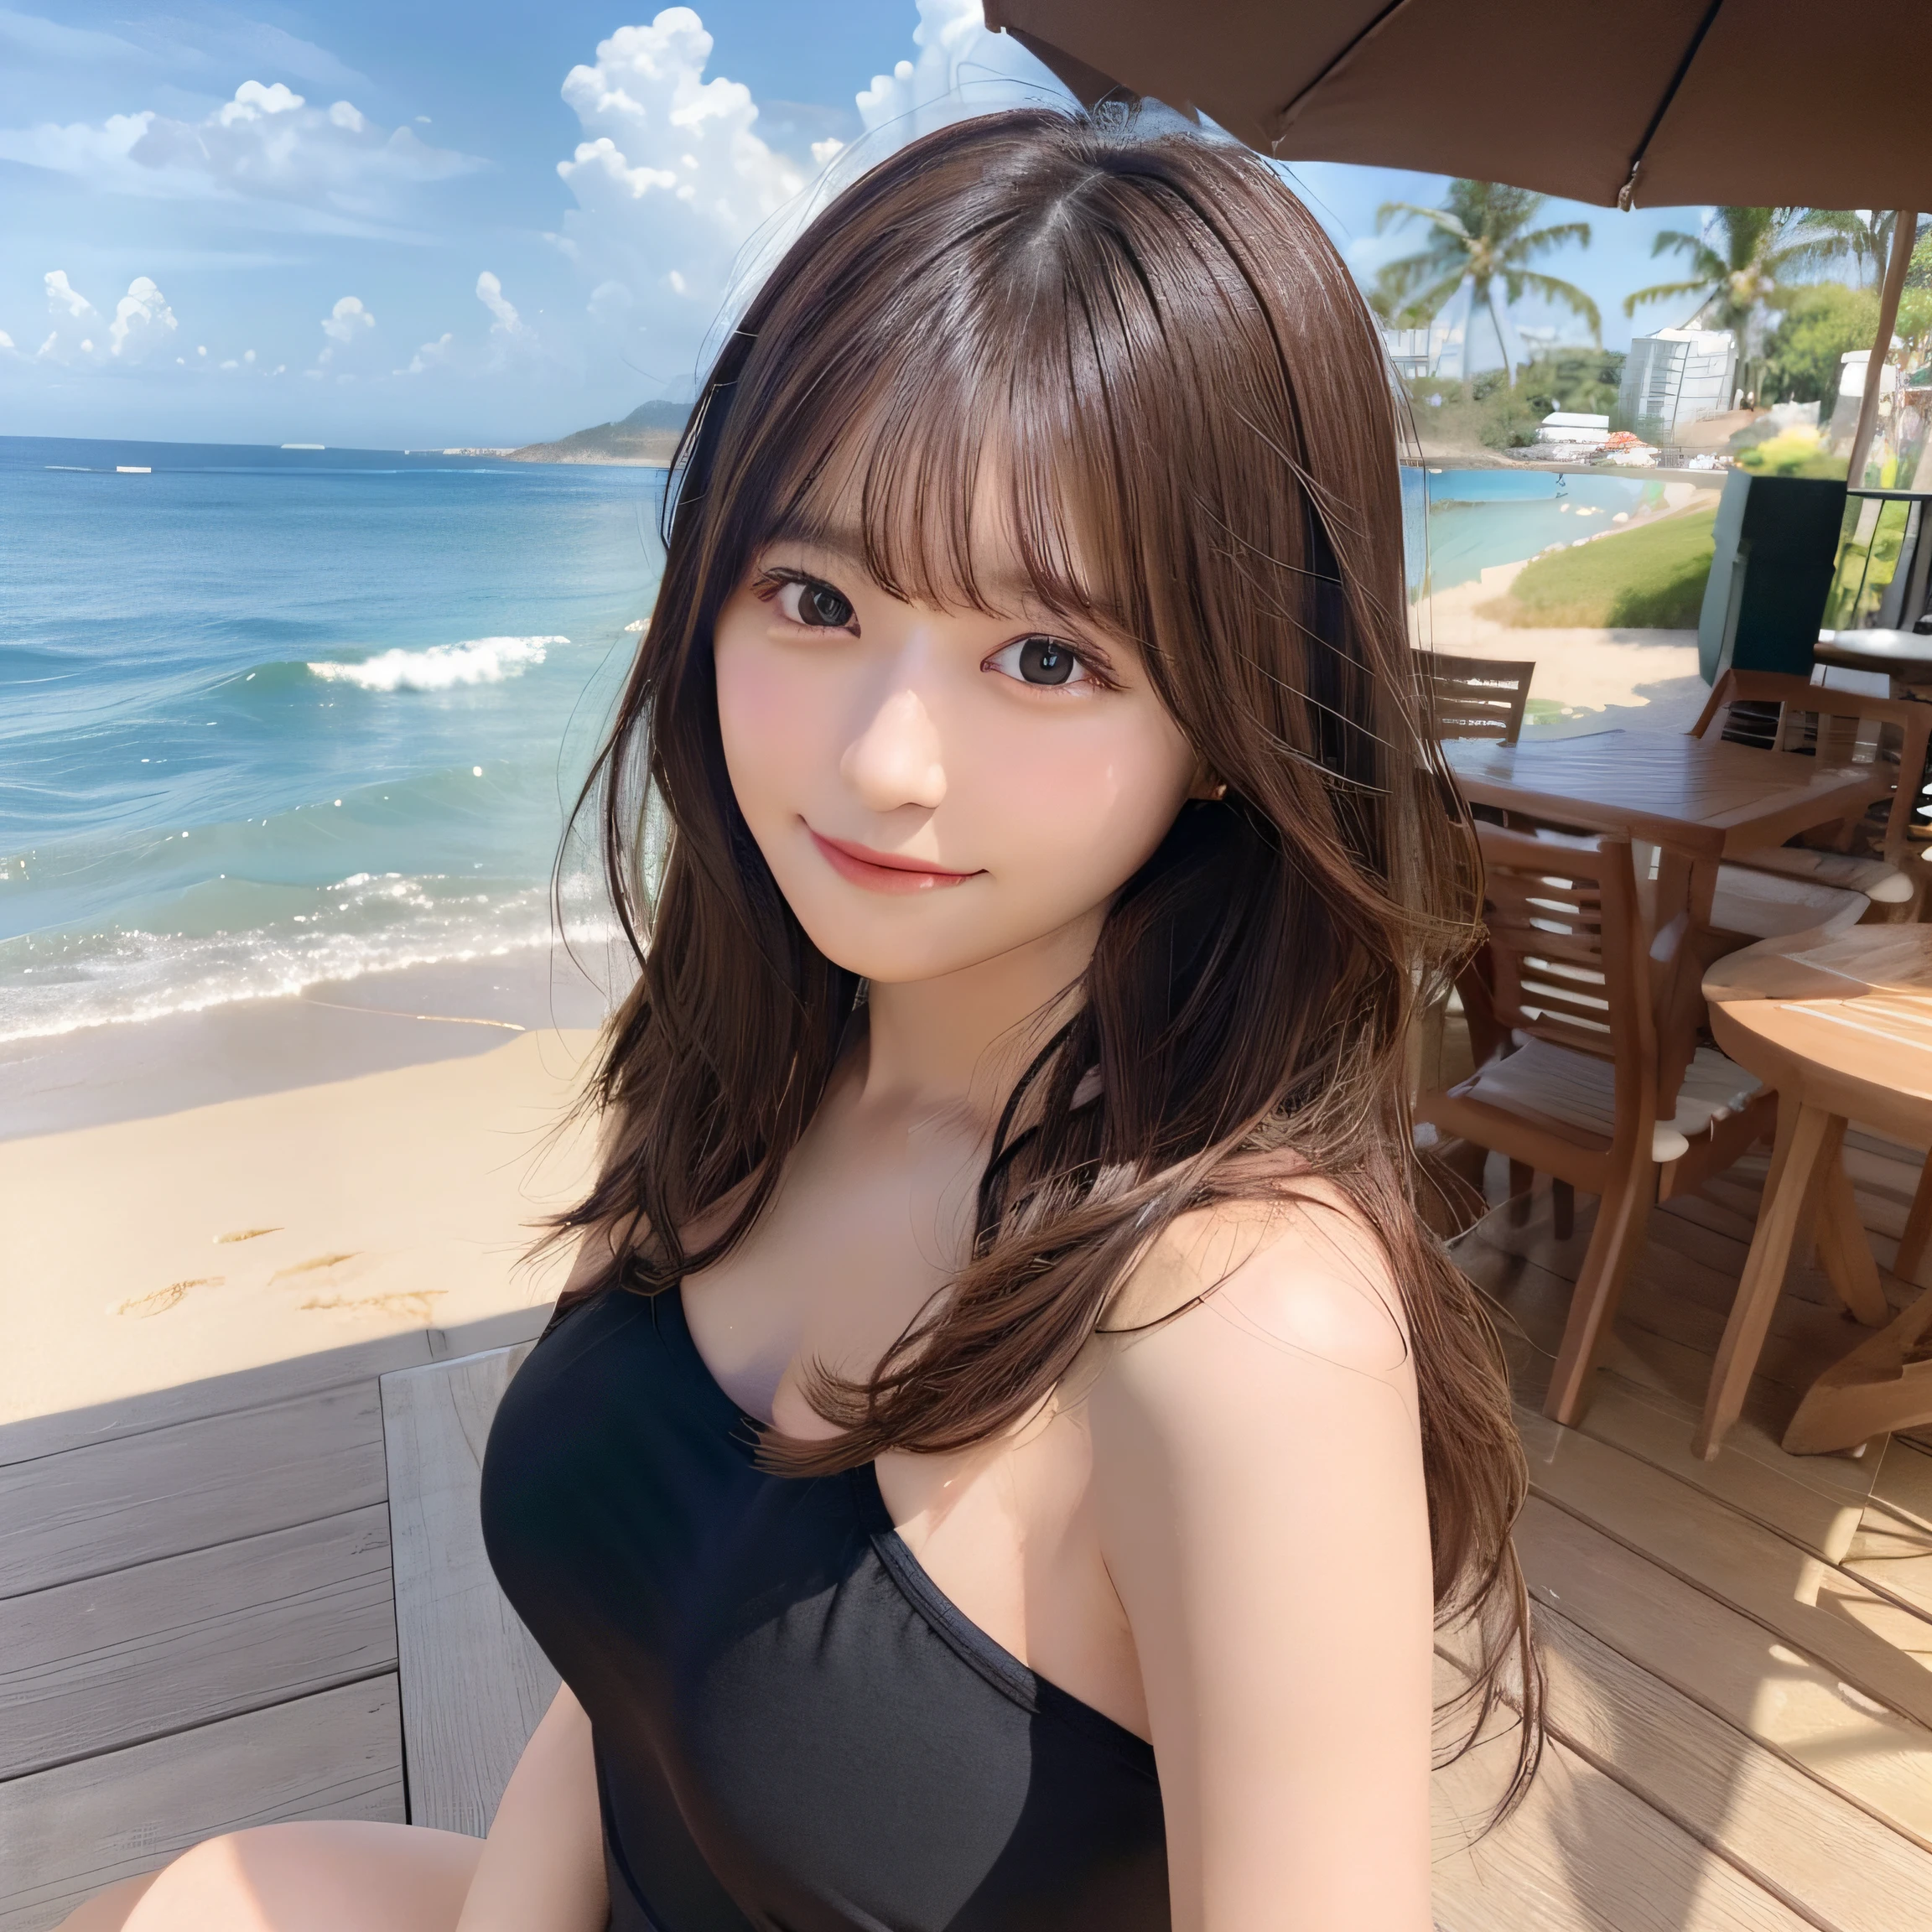 8k,Best Quality, 超A high resolution, (Photorealistic:1.4),​masterpiece:1.3, Raw photo, (upper thigh:1.6, From Side:0.7), (bokeh:1.２), sea side:1.3, (in a suite:1.6),sand beach:1.1, 1 Japanese girl, Cute, (独奏:1.6), (Shy smile), Smooth skin, (Brown medium hair,bangs), (touch hair:1.4),nogizaka,Cute swimsuit,Beautiful black eyes:1.３、full bodyesbian:1.4,ample breasts